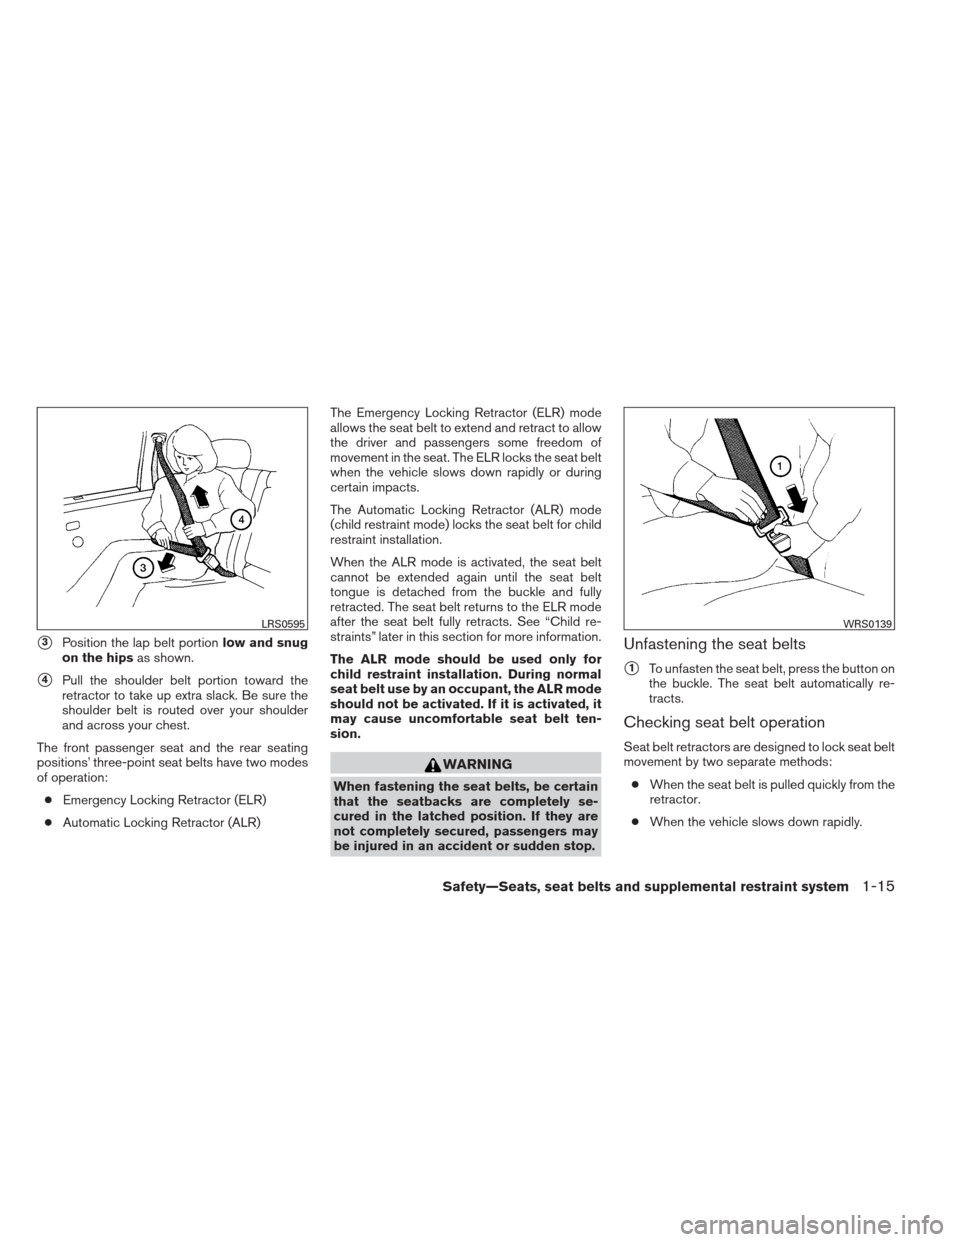 NISSAN ALTIMA 2013 L33 / 5.G Owners Manual 3Position the lap belt portionlow and snug
on the hips as shown.
4Pull the shoulder belt portion toward the
retractor to take up extra slack. Be sure the
shoulder belt is routed over your shoulder
a